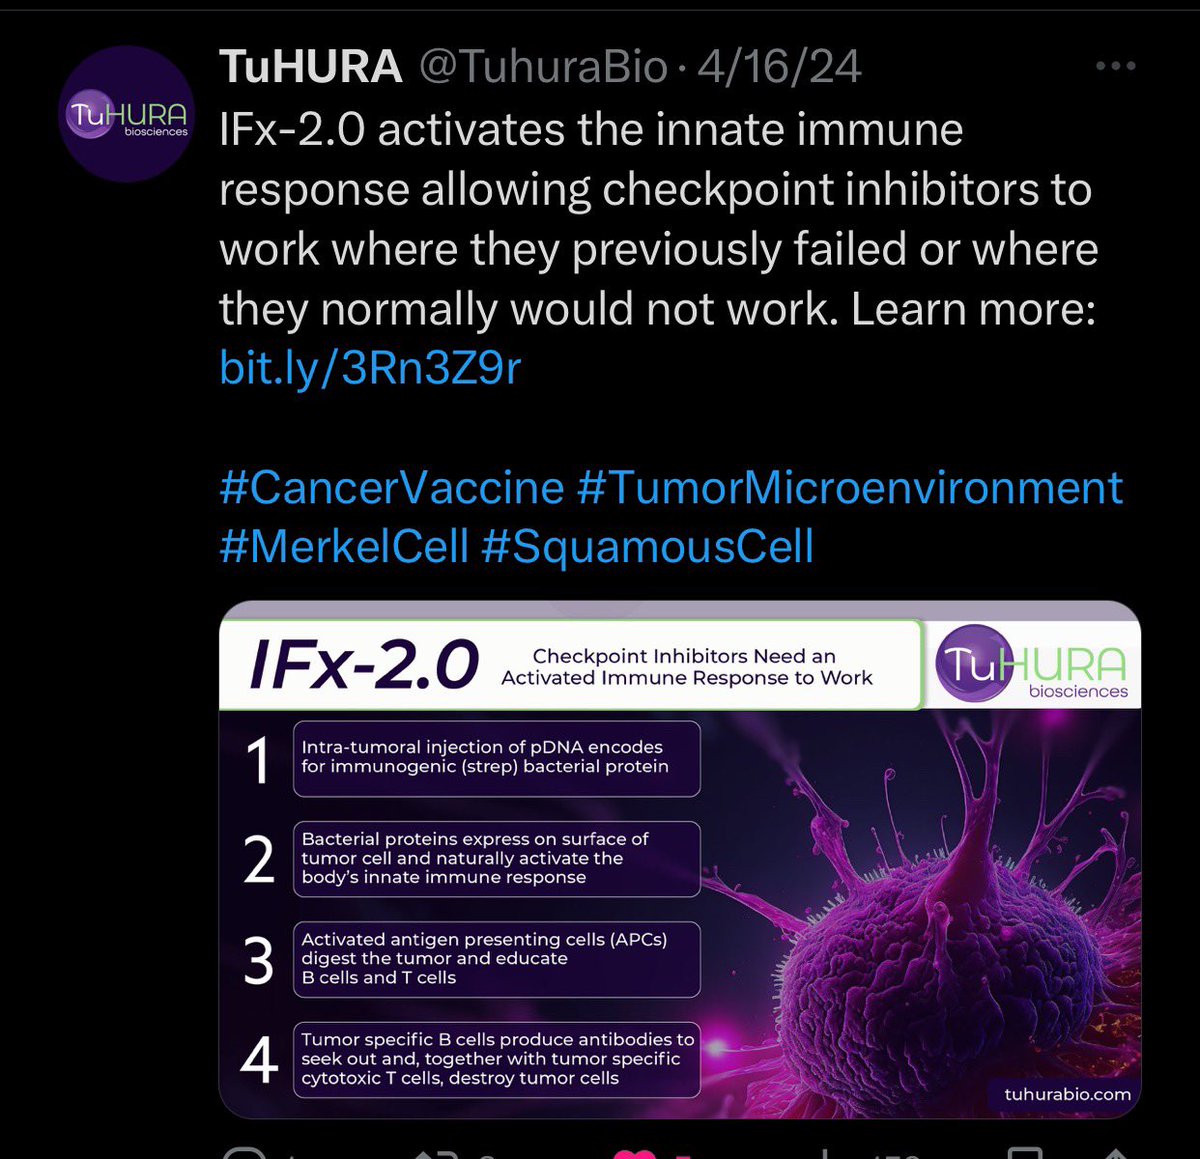 $KTRA Just passing along this merger info. HURA is presenting its work on a cancer vaccine at months end. And there is a merger agreement with Kintara. Maybe it’s time to get in while it’s still cheap? #Cancer #CureCancer #CancerResearch